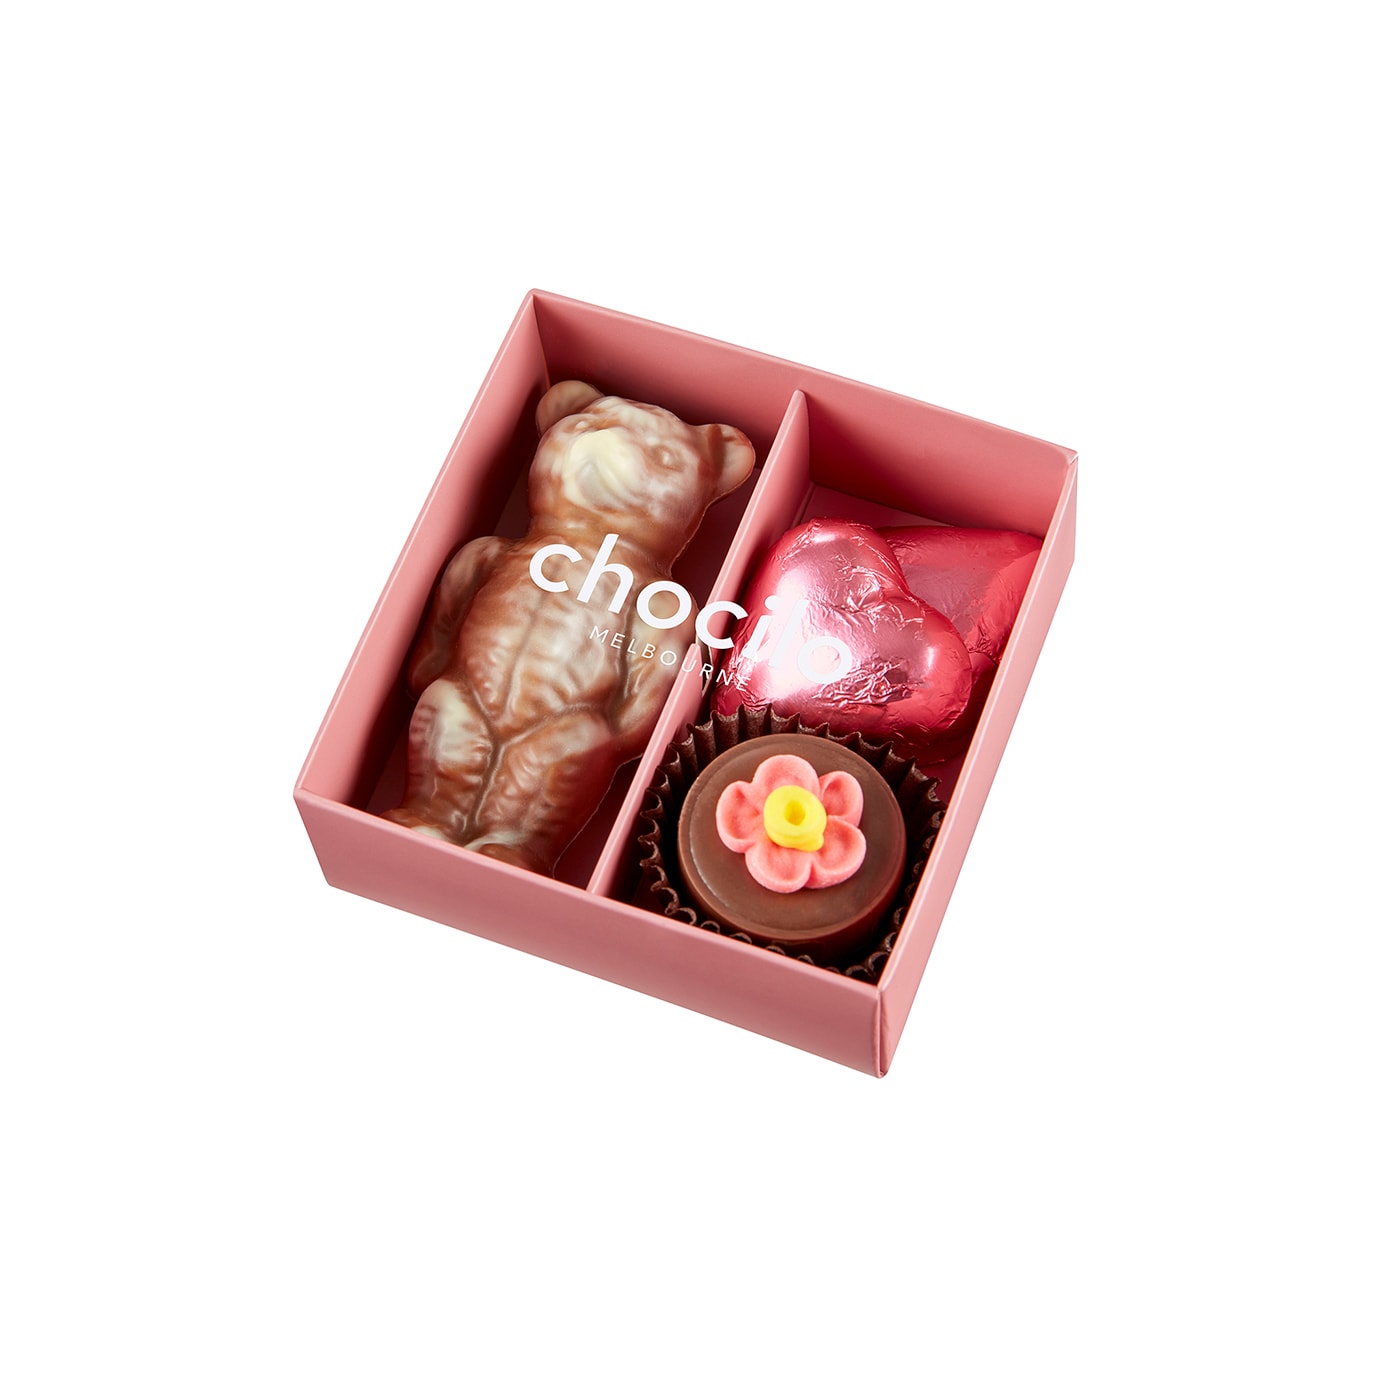 Chocilo Melbourne marbled chocolate bear, pink foiled milk chocolate hearts, and chocolate praline flower pot 4 pack gift box